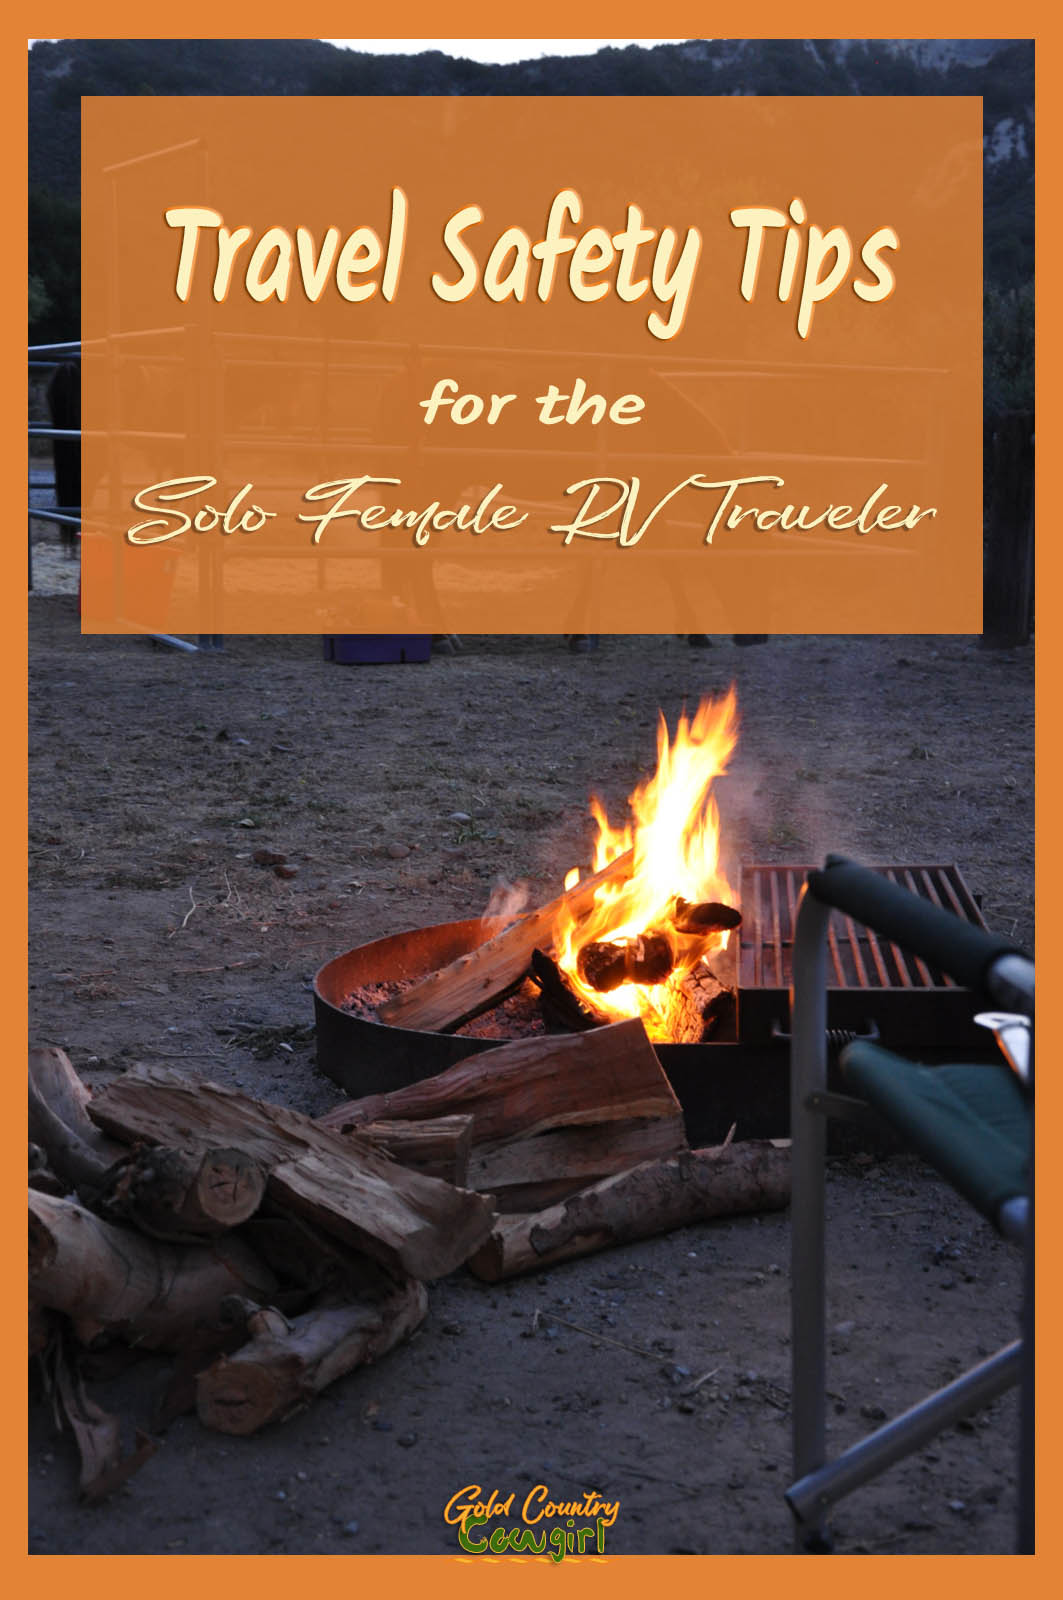 Travel Safety Tips title graphic v